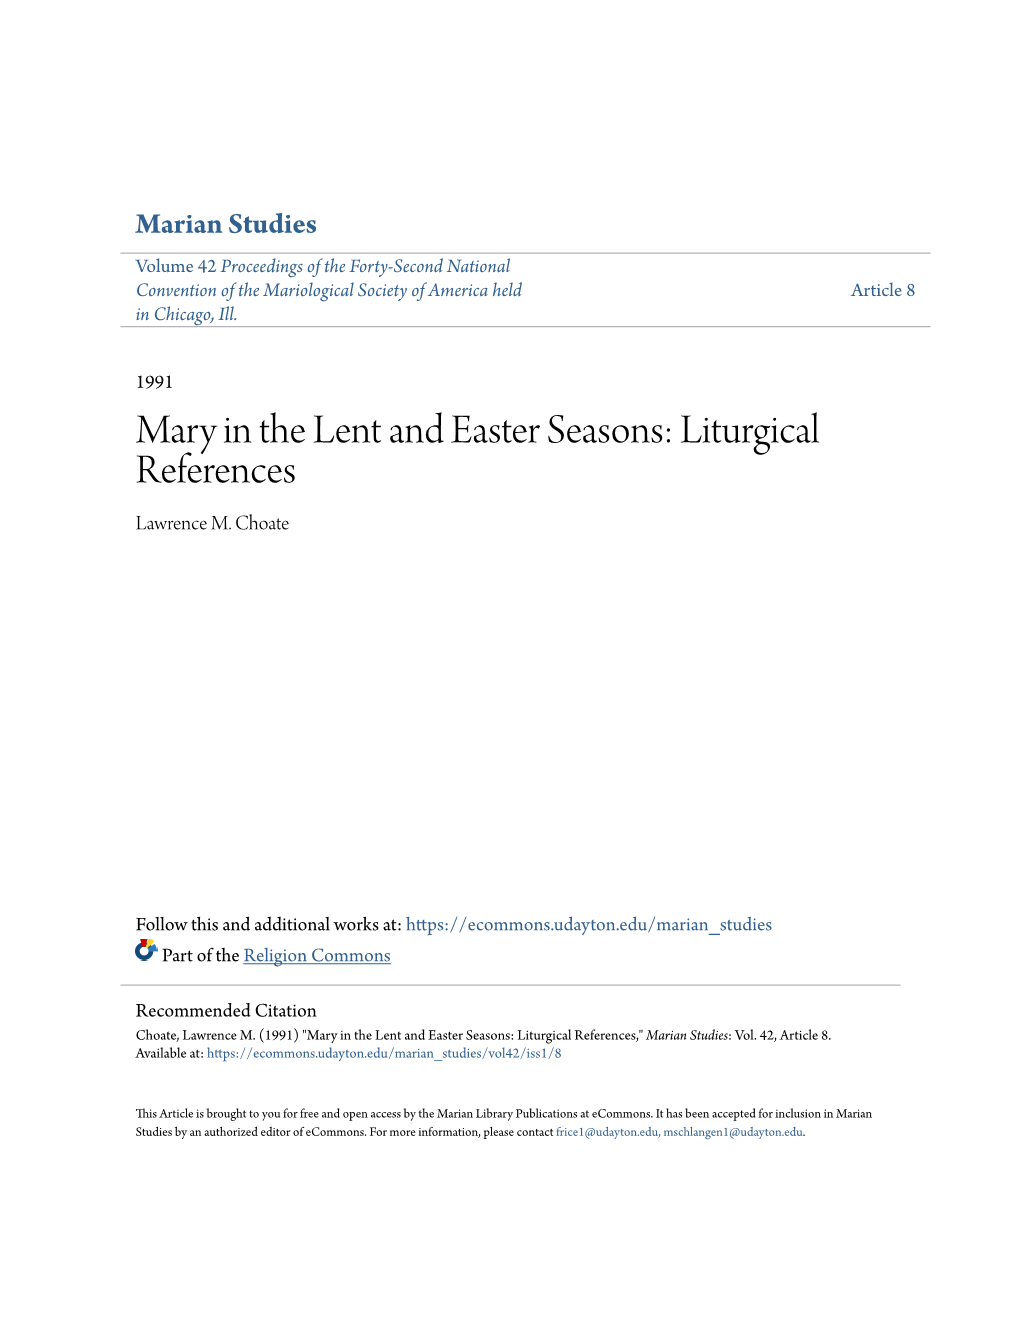 Mary in the Lent and Easter Seasons: Liturgical References Lawrence M